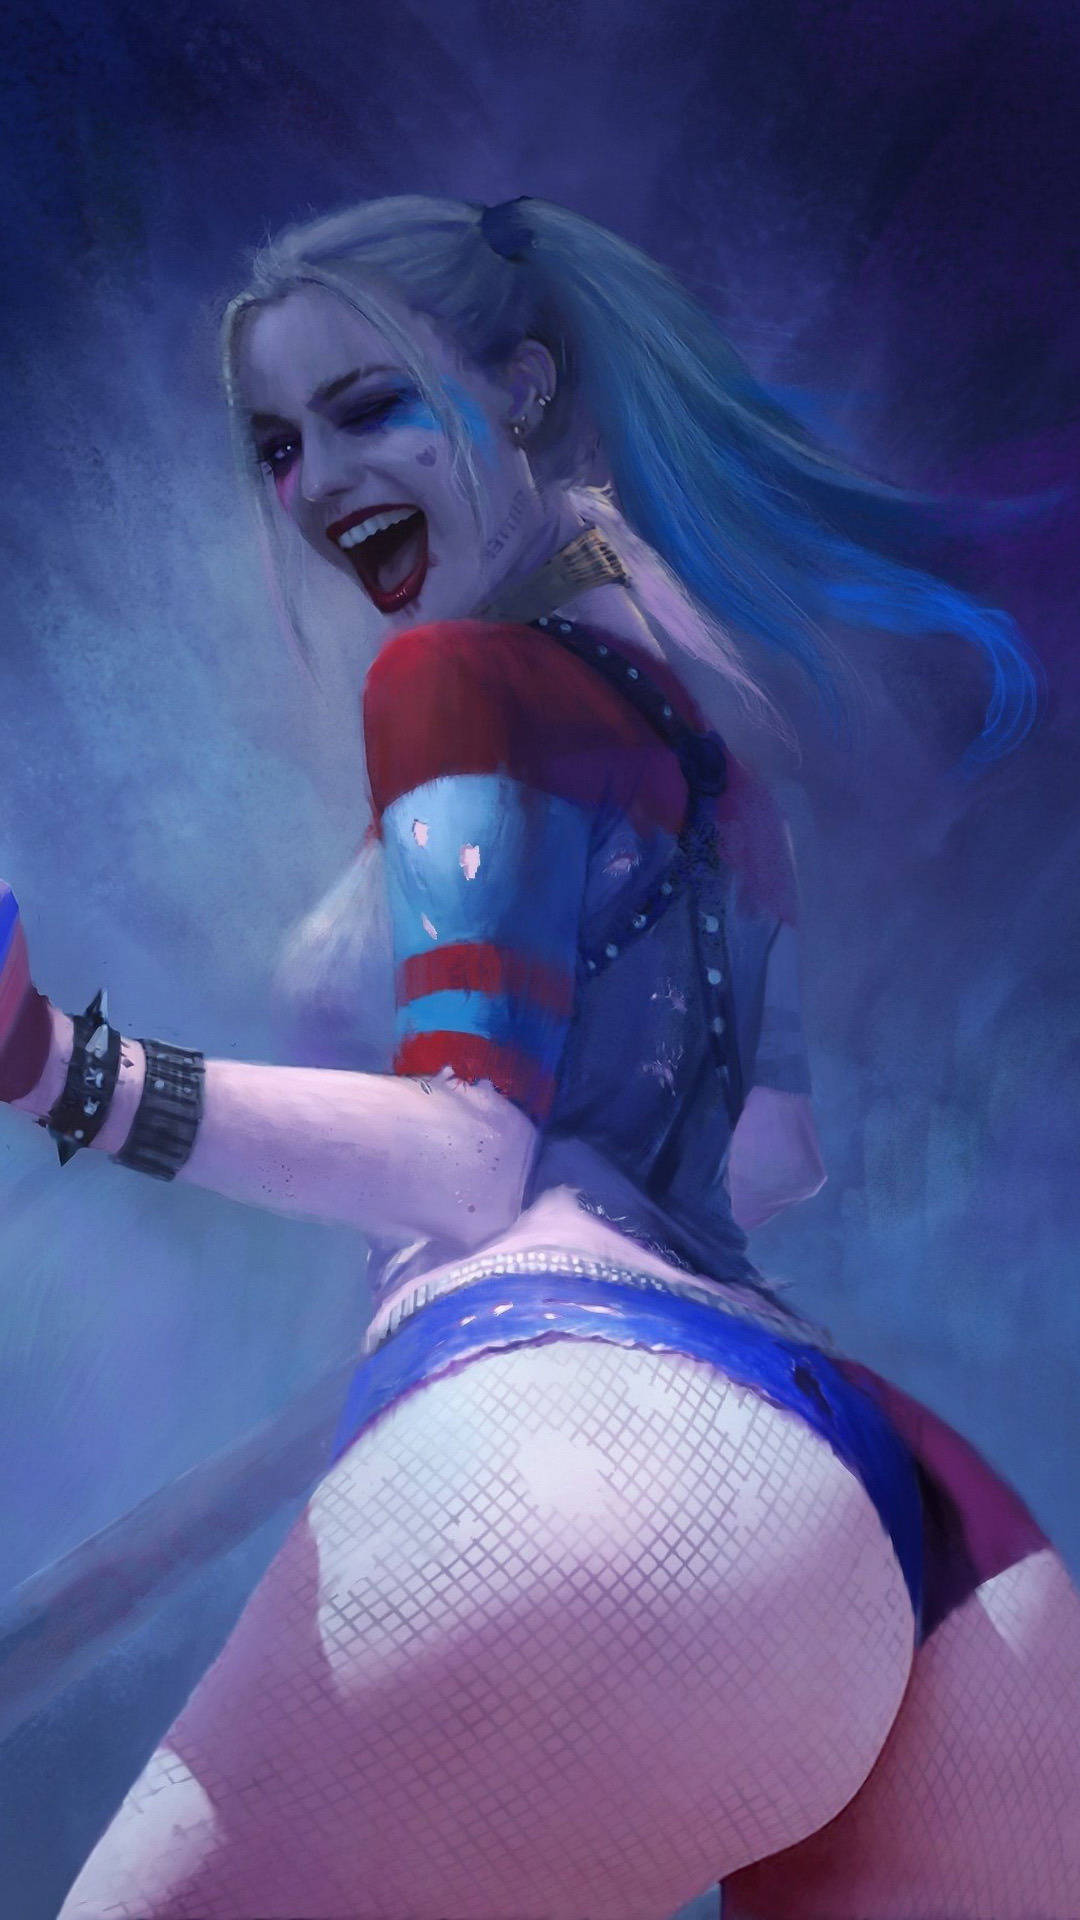 andrea van dyke recommends Hot Harley Quinn Images